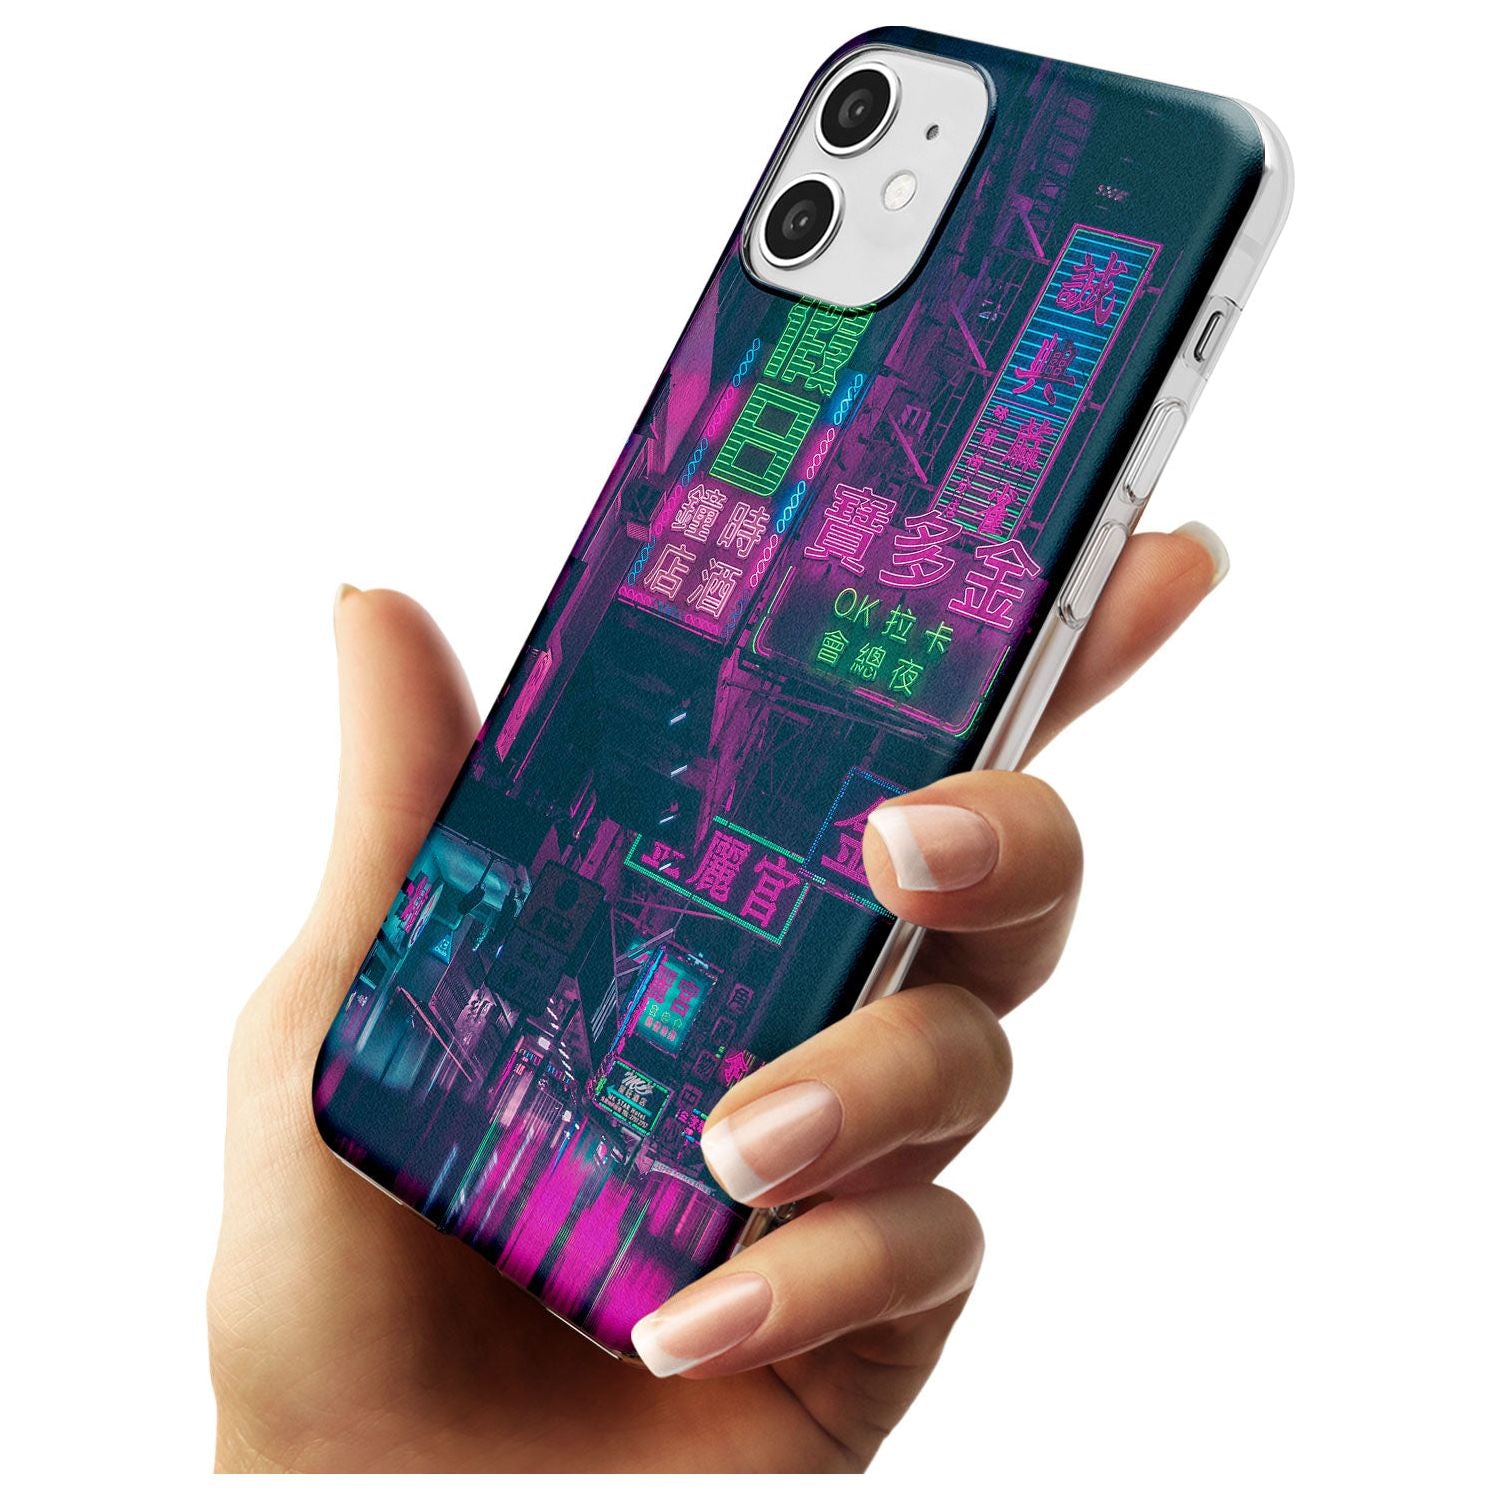 Rainy Reflections - Neon Cities Photographs Slim TPU Phone Case for iPhone 11